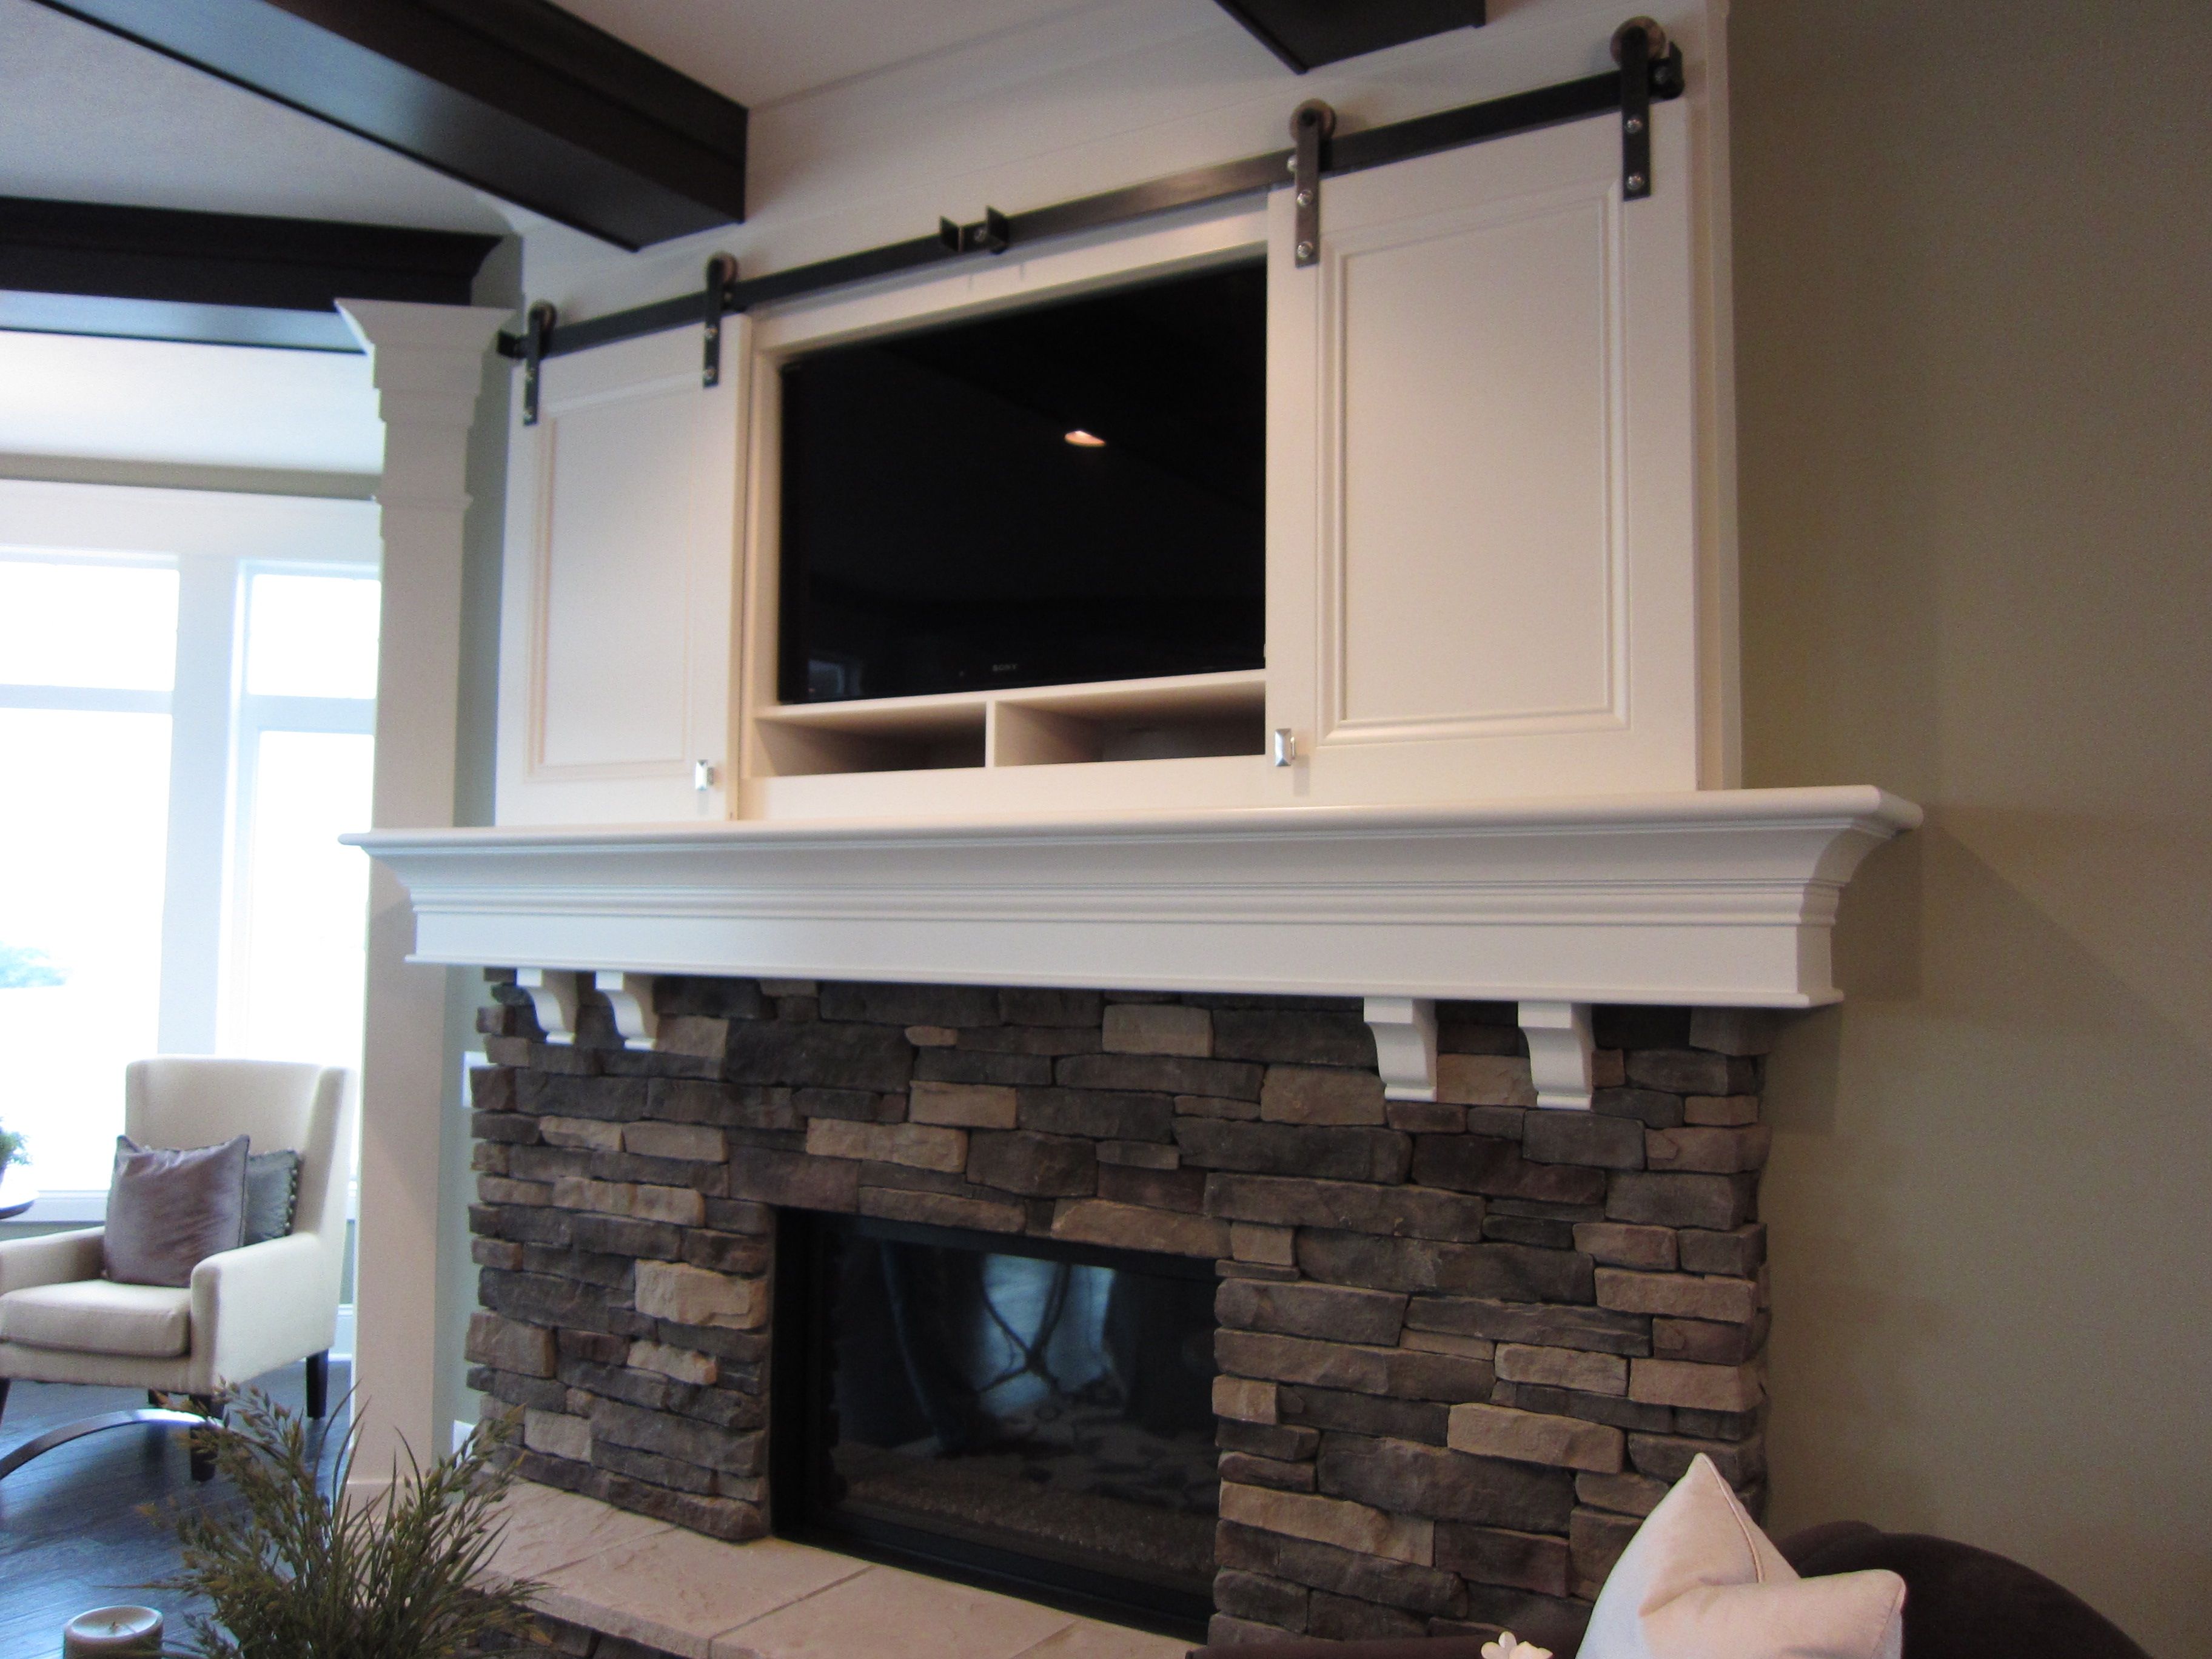 How to Mount Tv Above Fireplace Awesome Fireplace Tv Mantel Ideas Best 25 Tv Above Fireplace Ideas